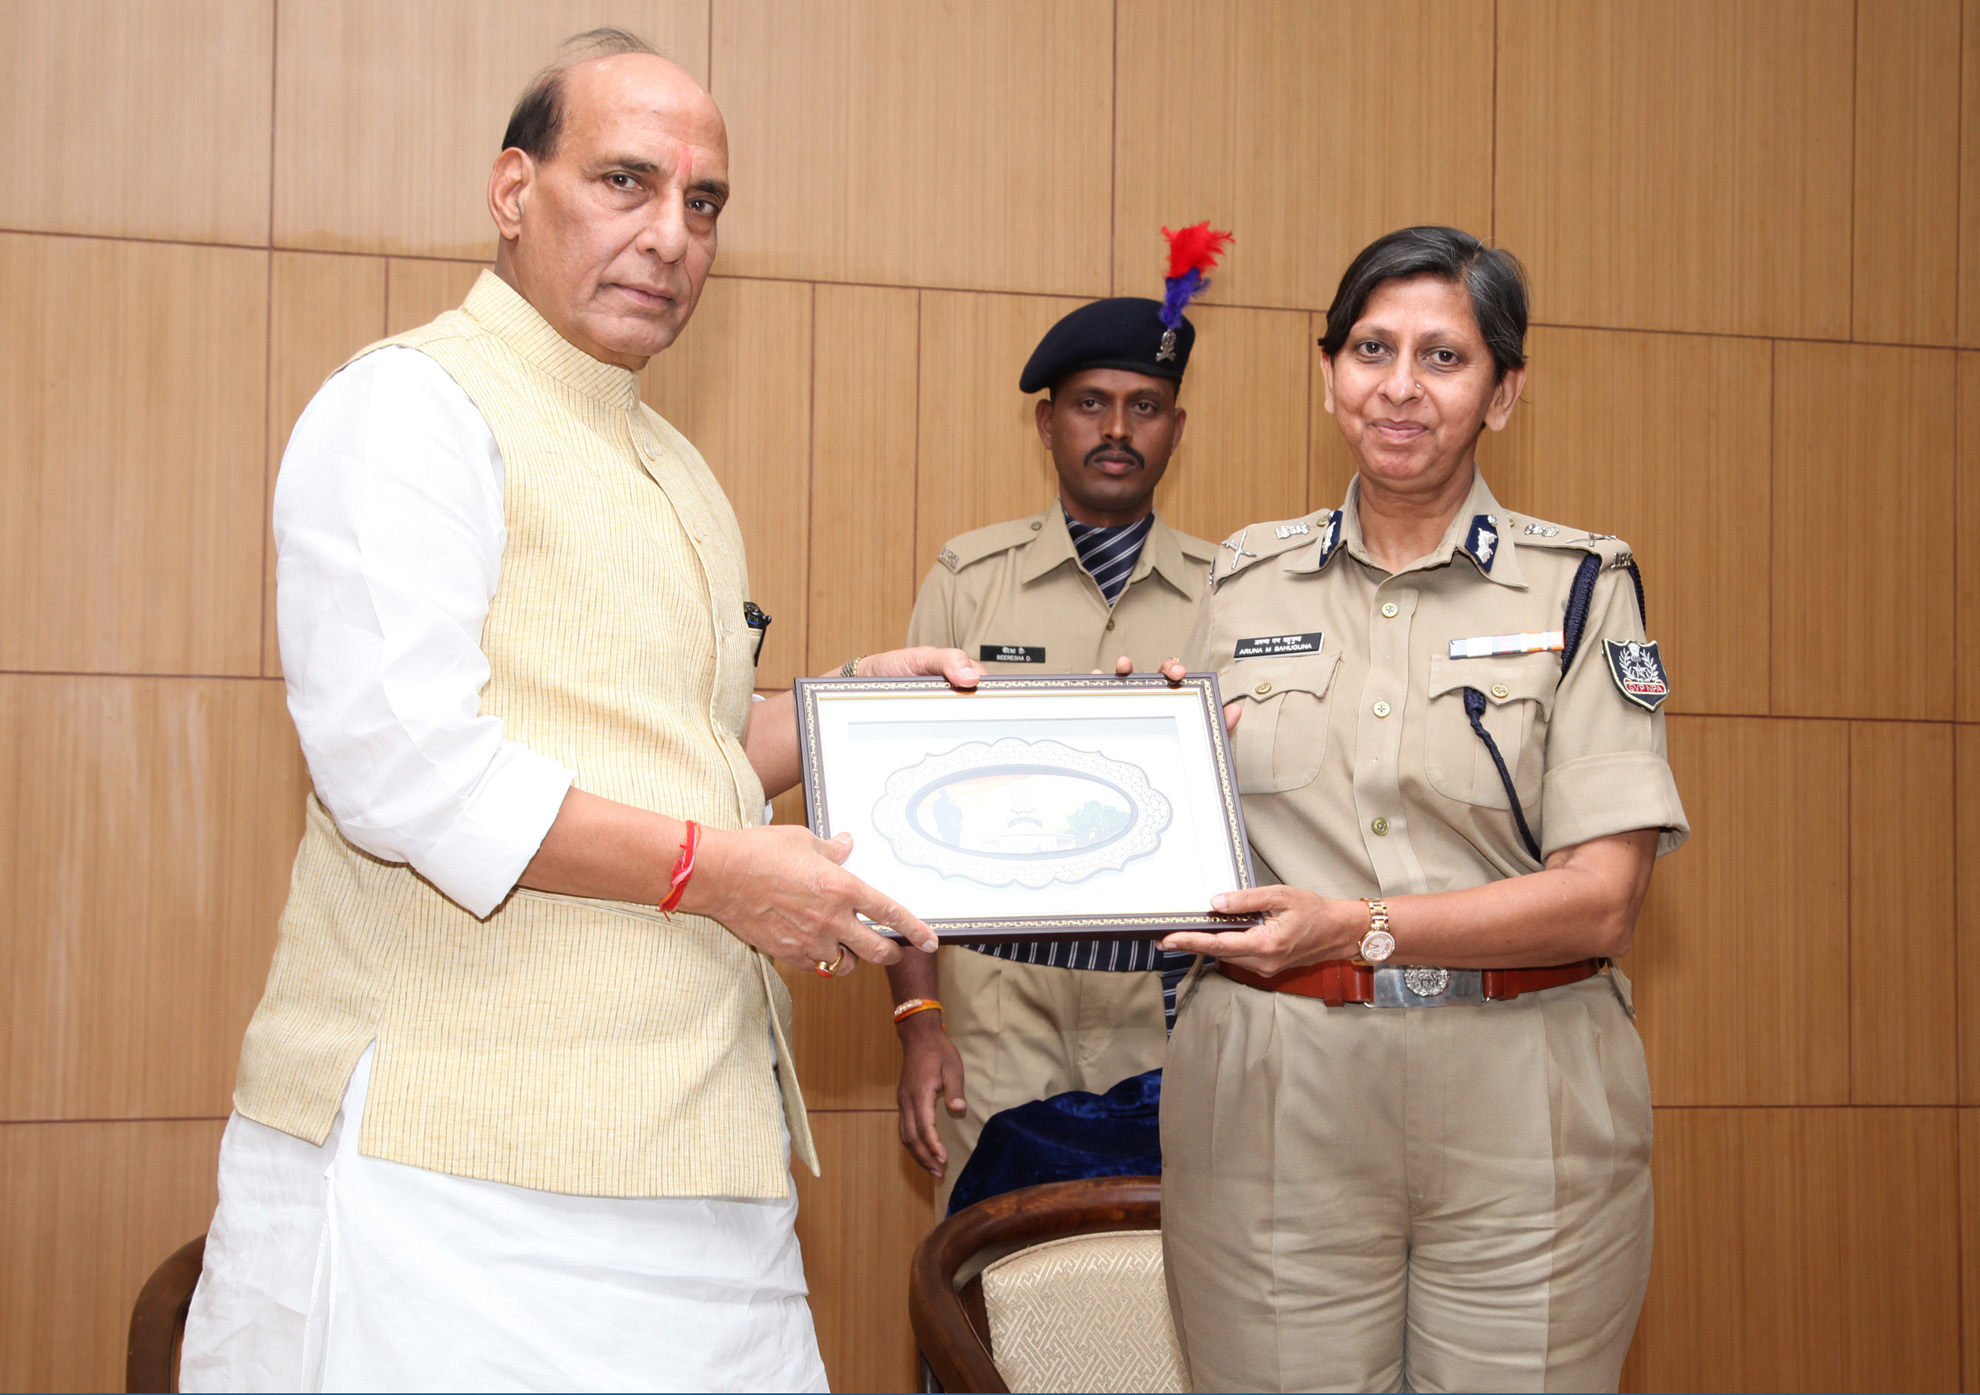 The Union Home Minister, Shri Rajnath Singh being presented a memento by the Director, National Police Academy, Ms. Aruna Bahuguna, at Sardar Vallabhbhai Patel National Police Academy, in Hyderabad on September 02, 2016.